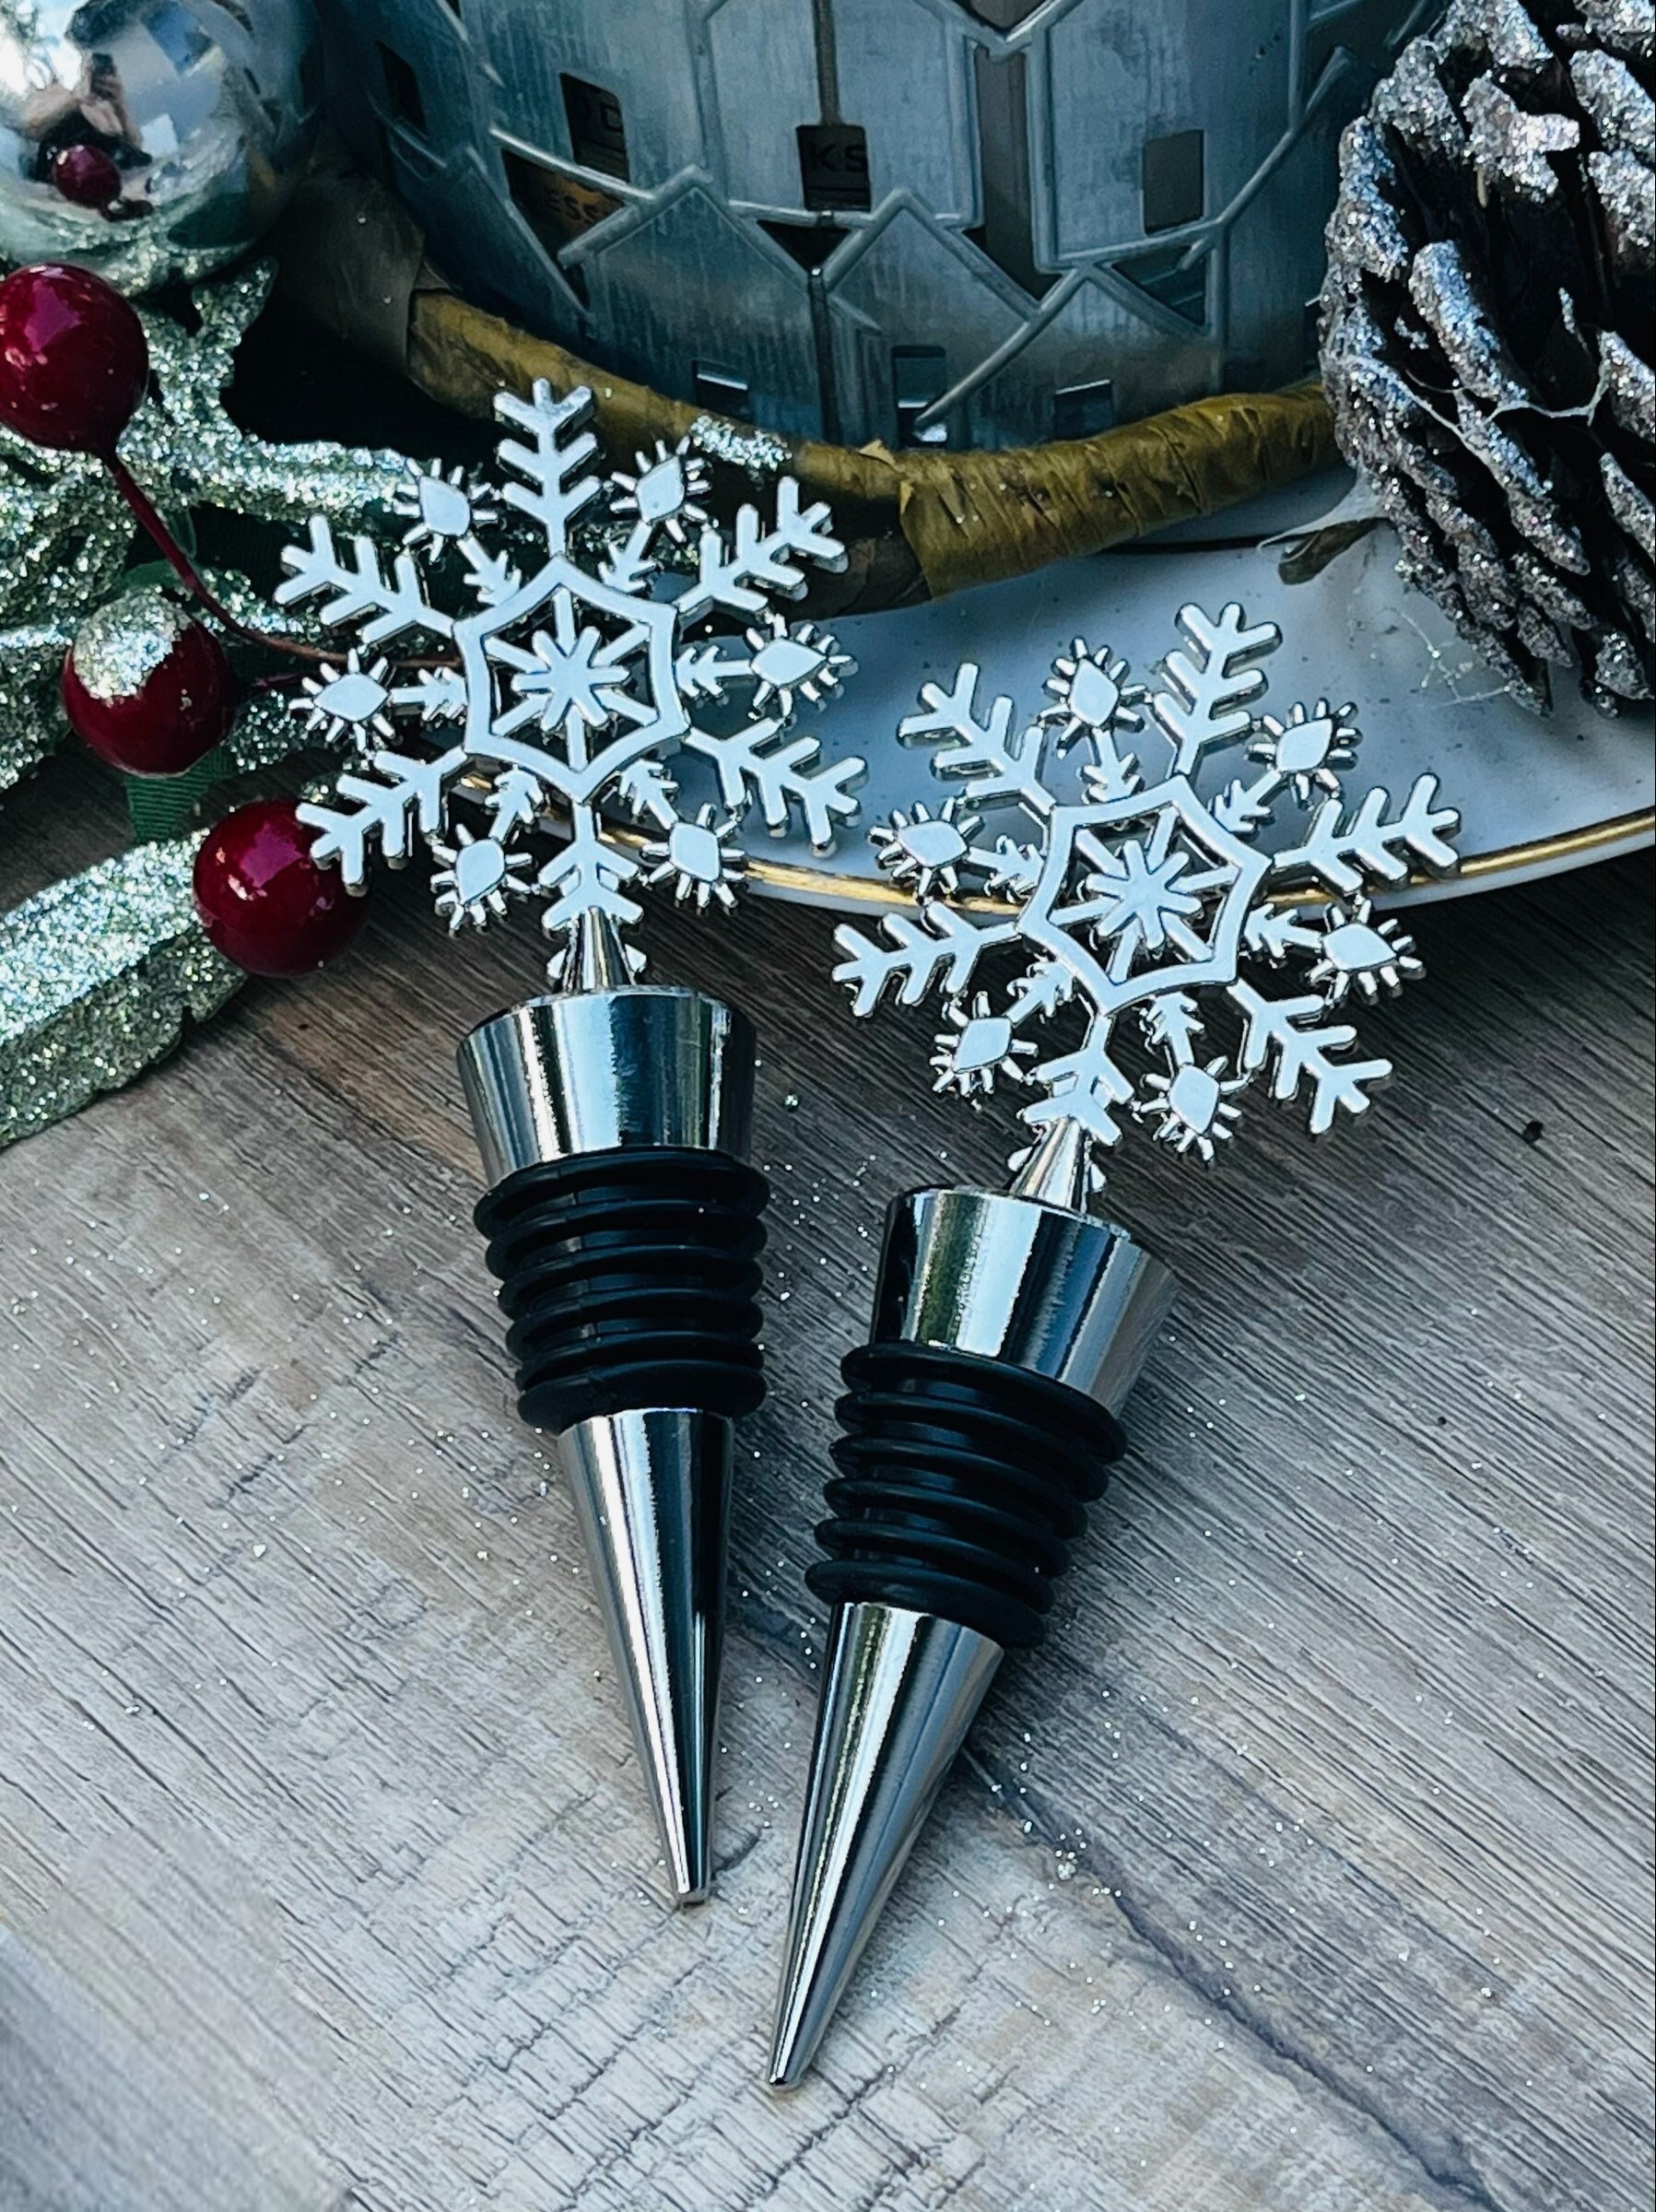 Laser Cut Acrylic Snowflakes Drink Stirrer Frosted Snowflake